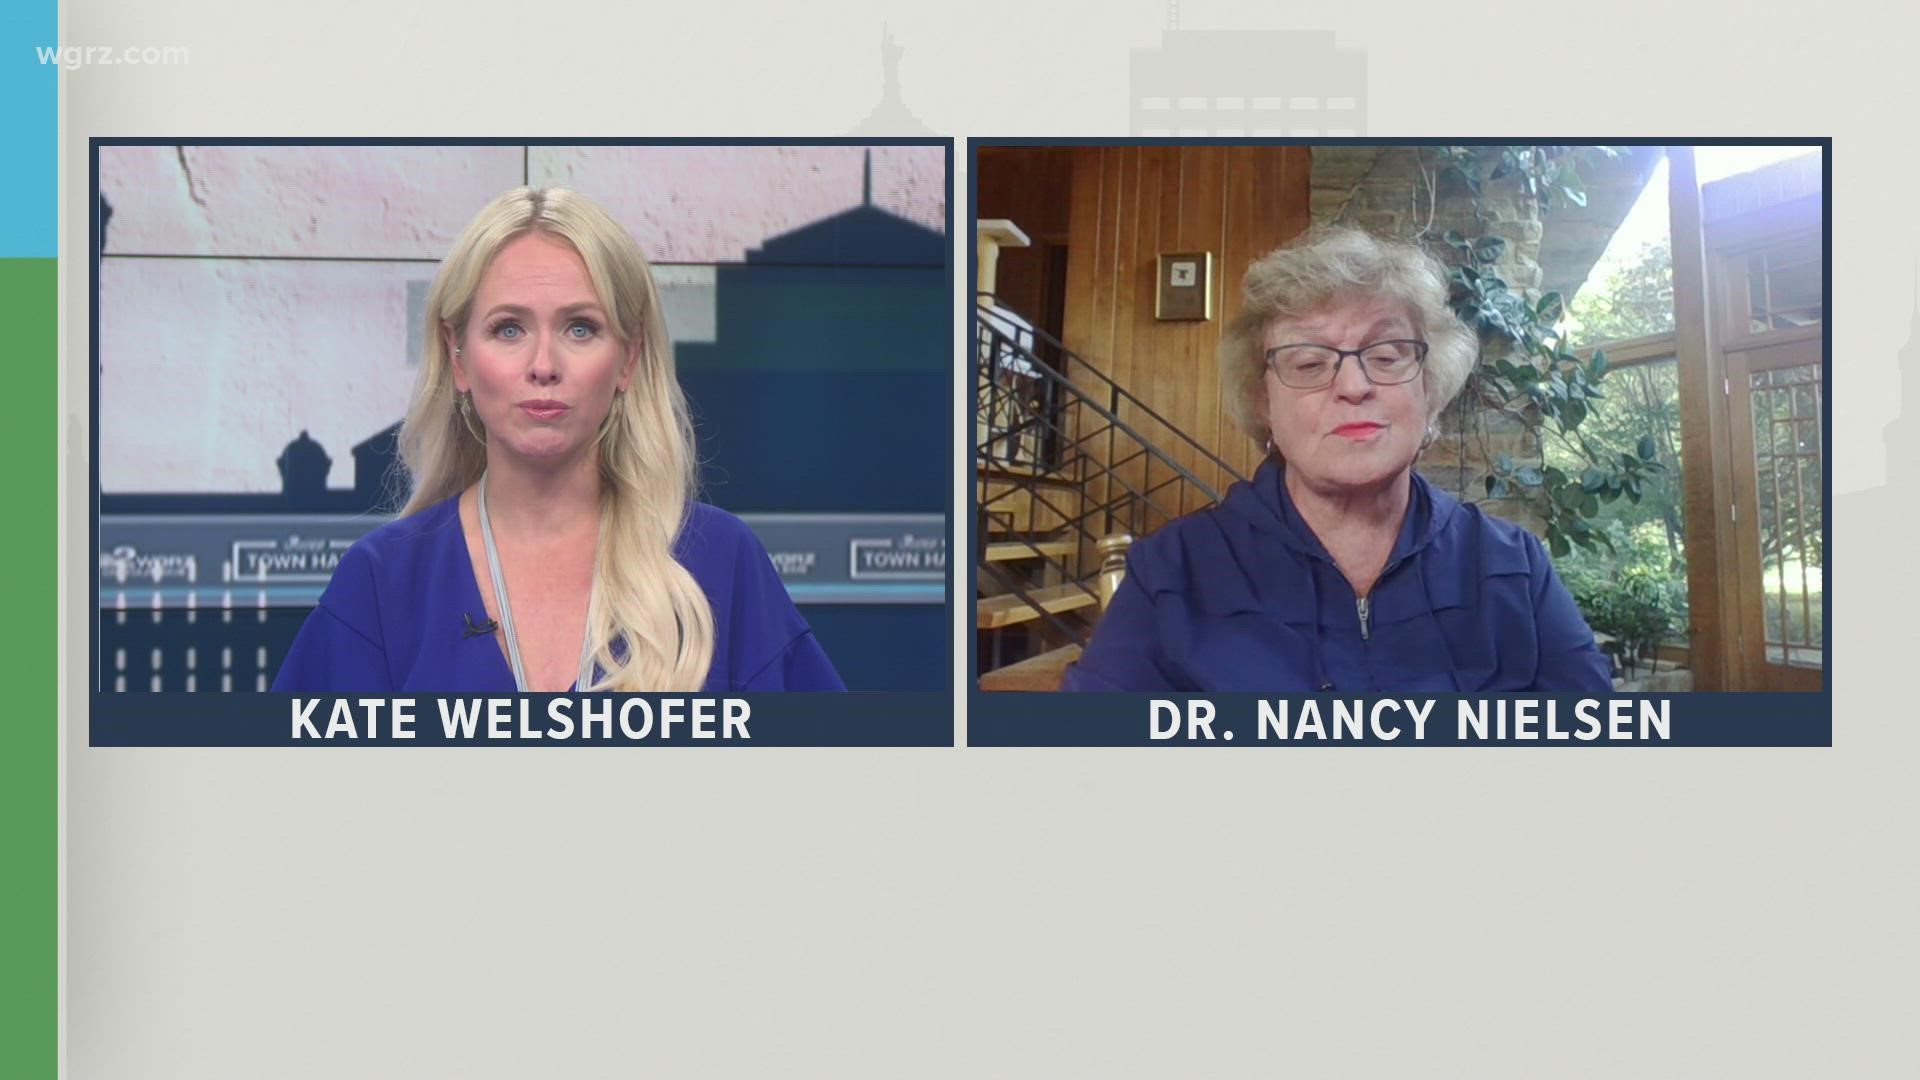 Dr. Nancy Nielsen, the senior associate dean for health policy at UB's Jacobs School of Medicine, joins our town hall to discuss the flu and COVID-19